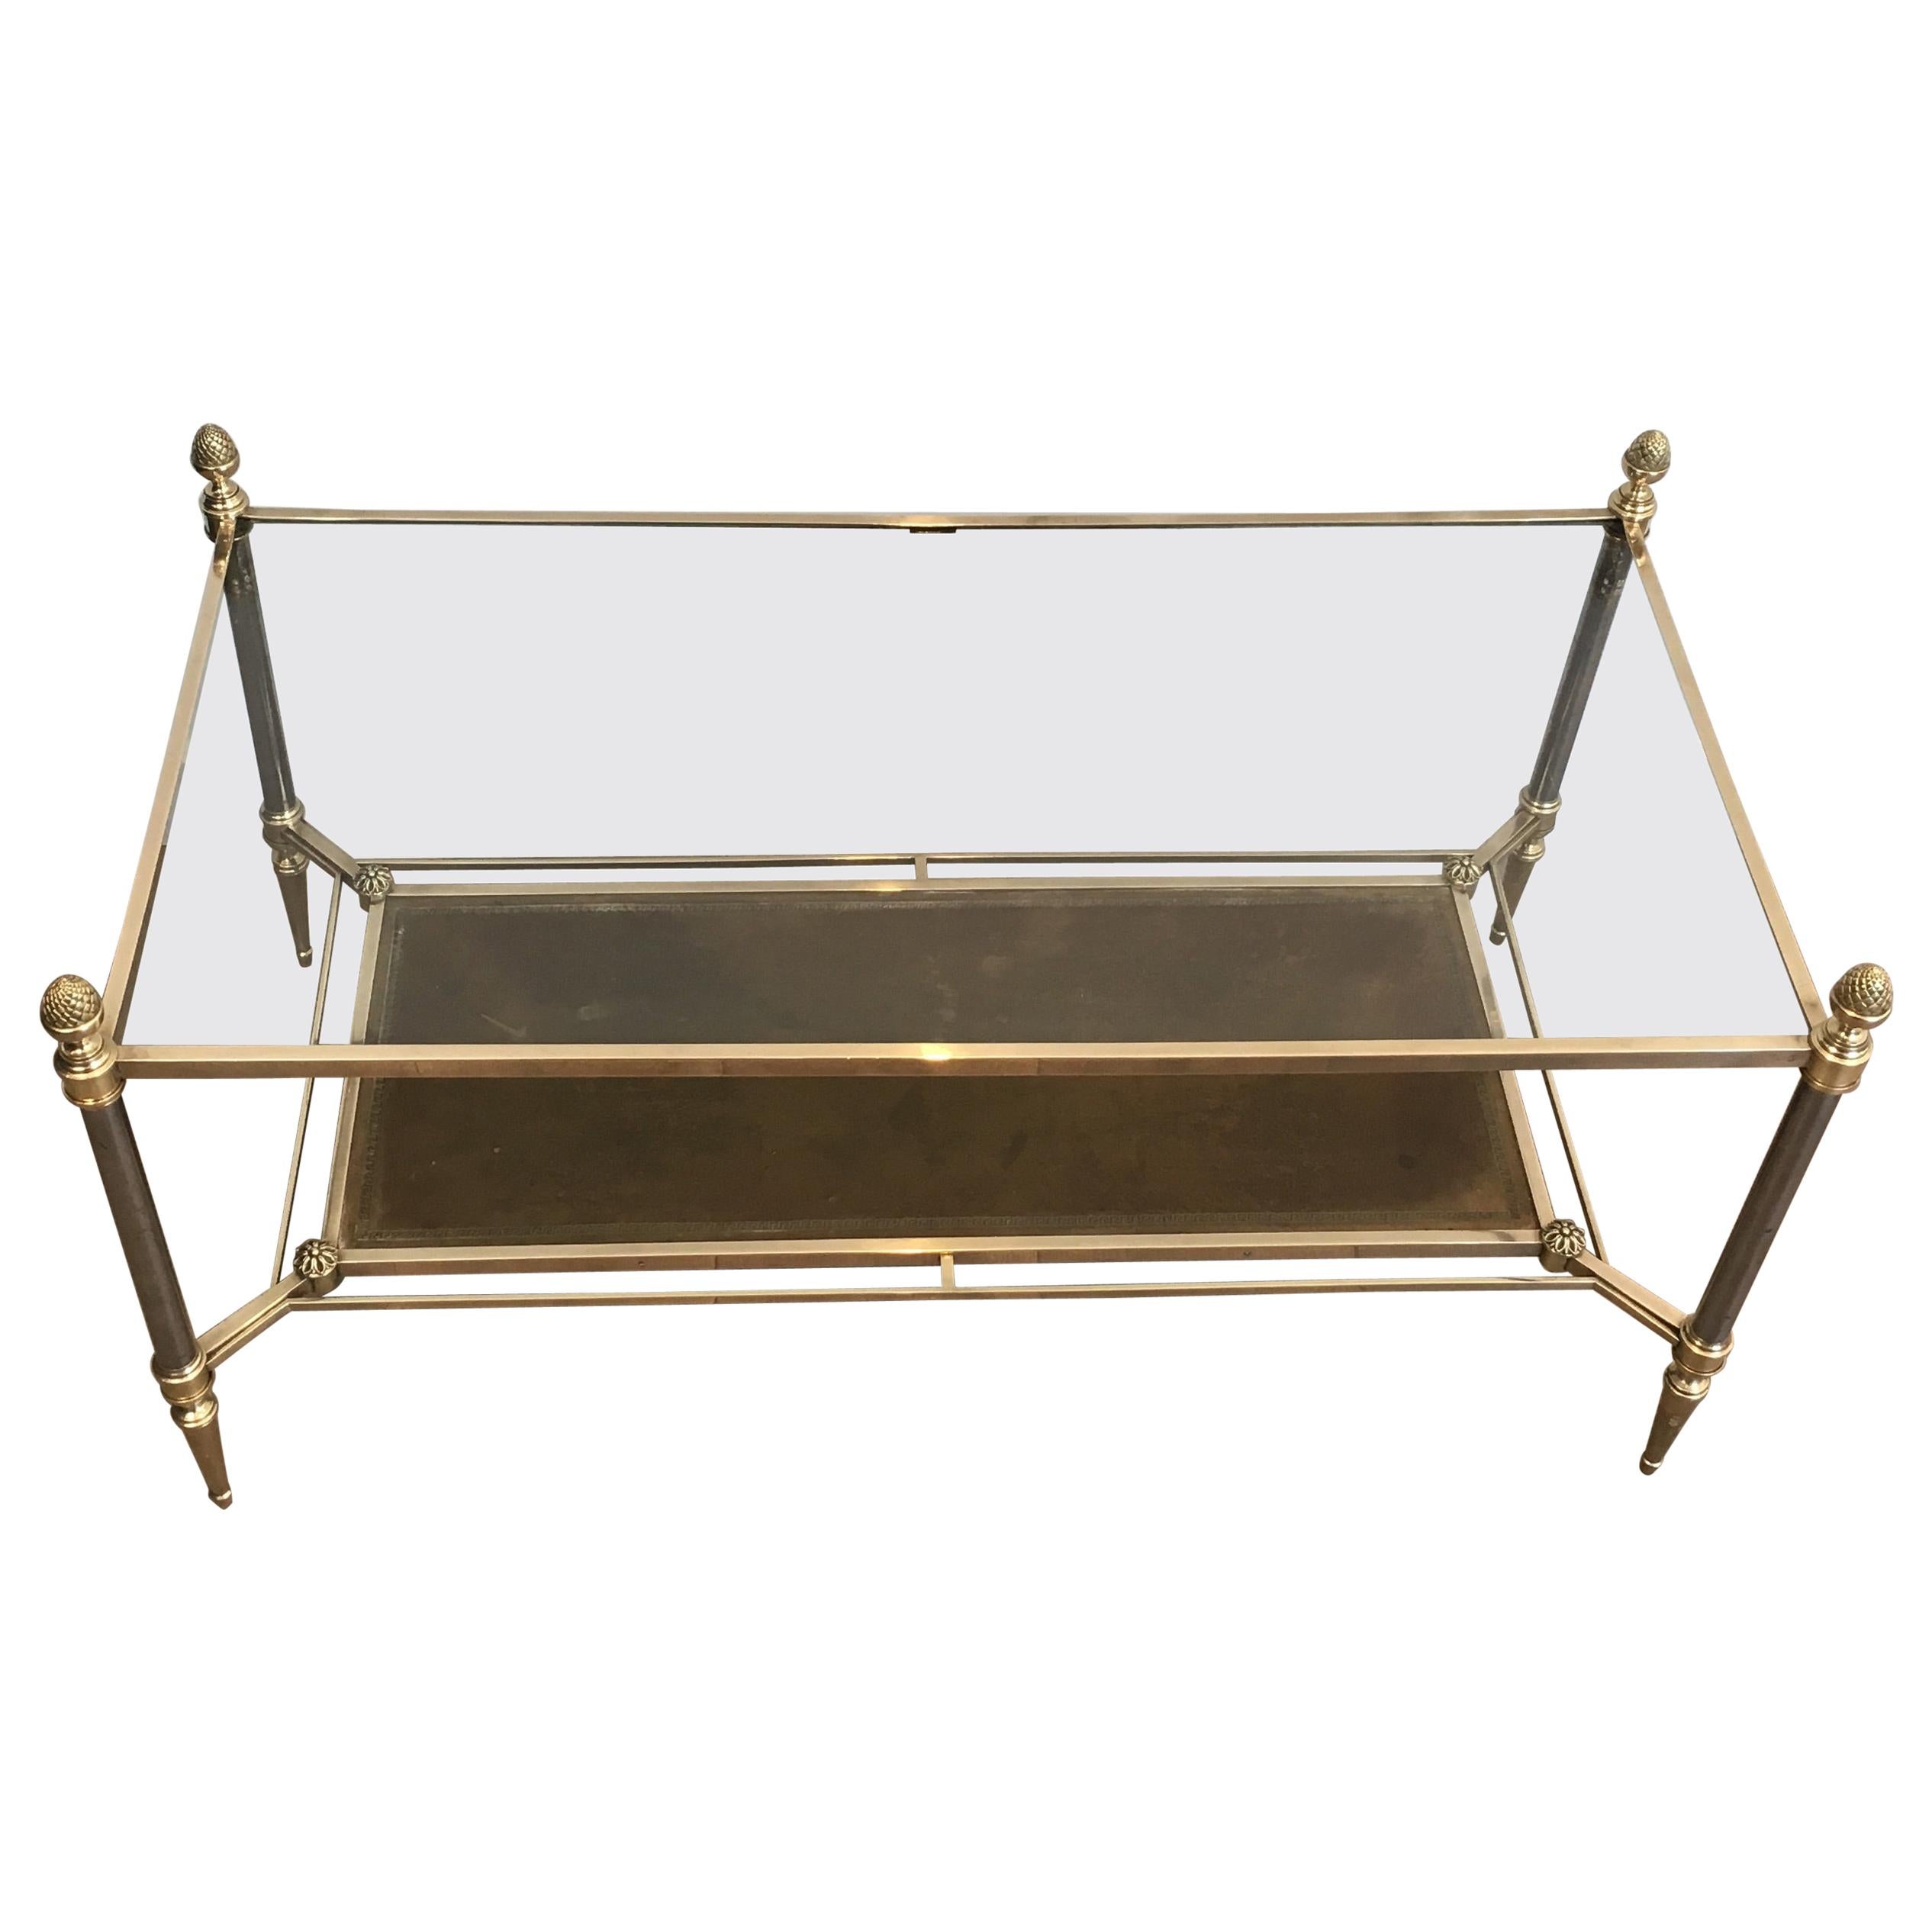 Maison Jansen, Neoclassical Brass and Brushed Steel Coffee Table with Leather